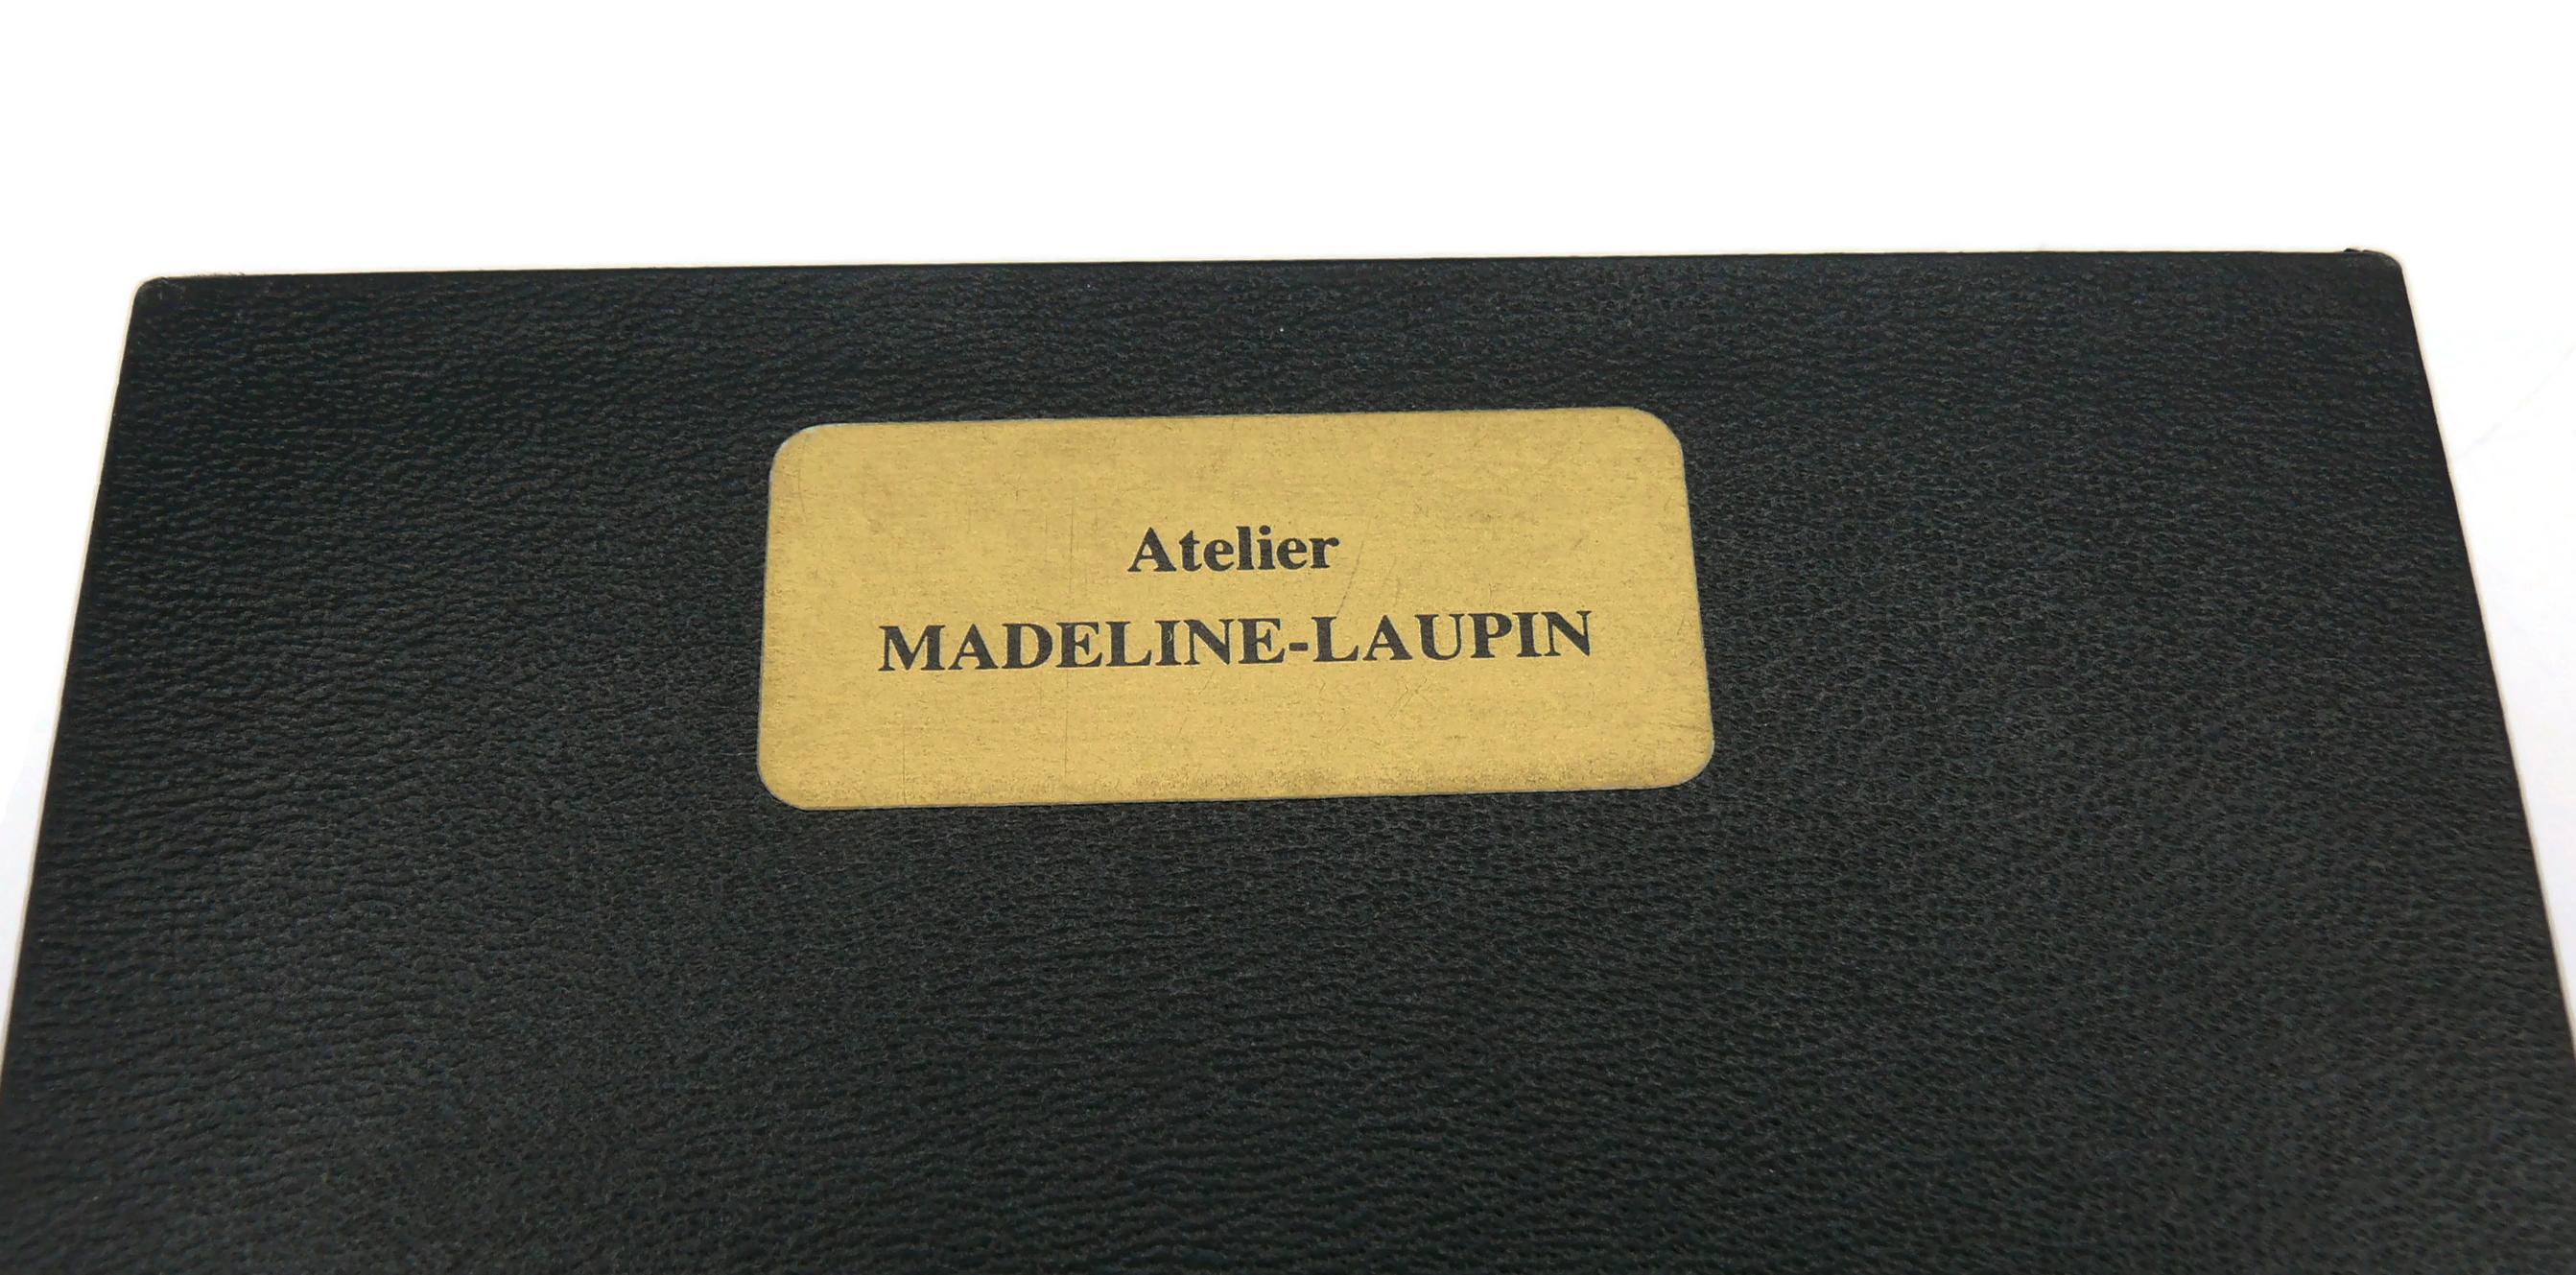 After JEAN COCTEAU by Atelier MADELINE-LAUPIN 